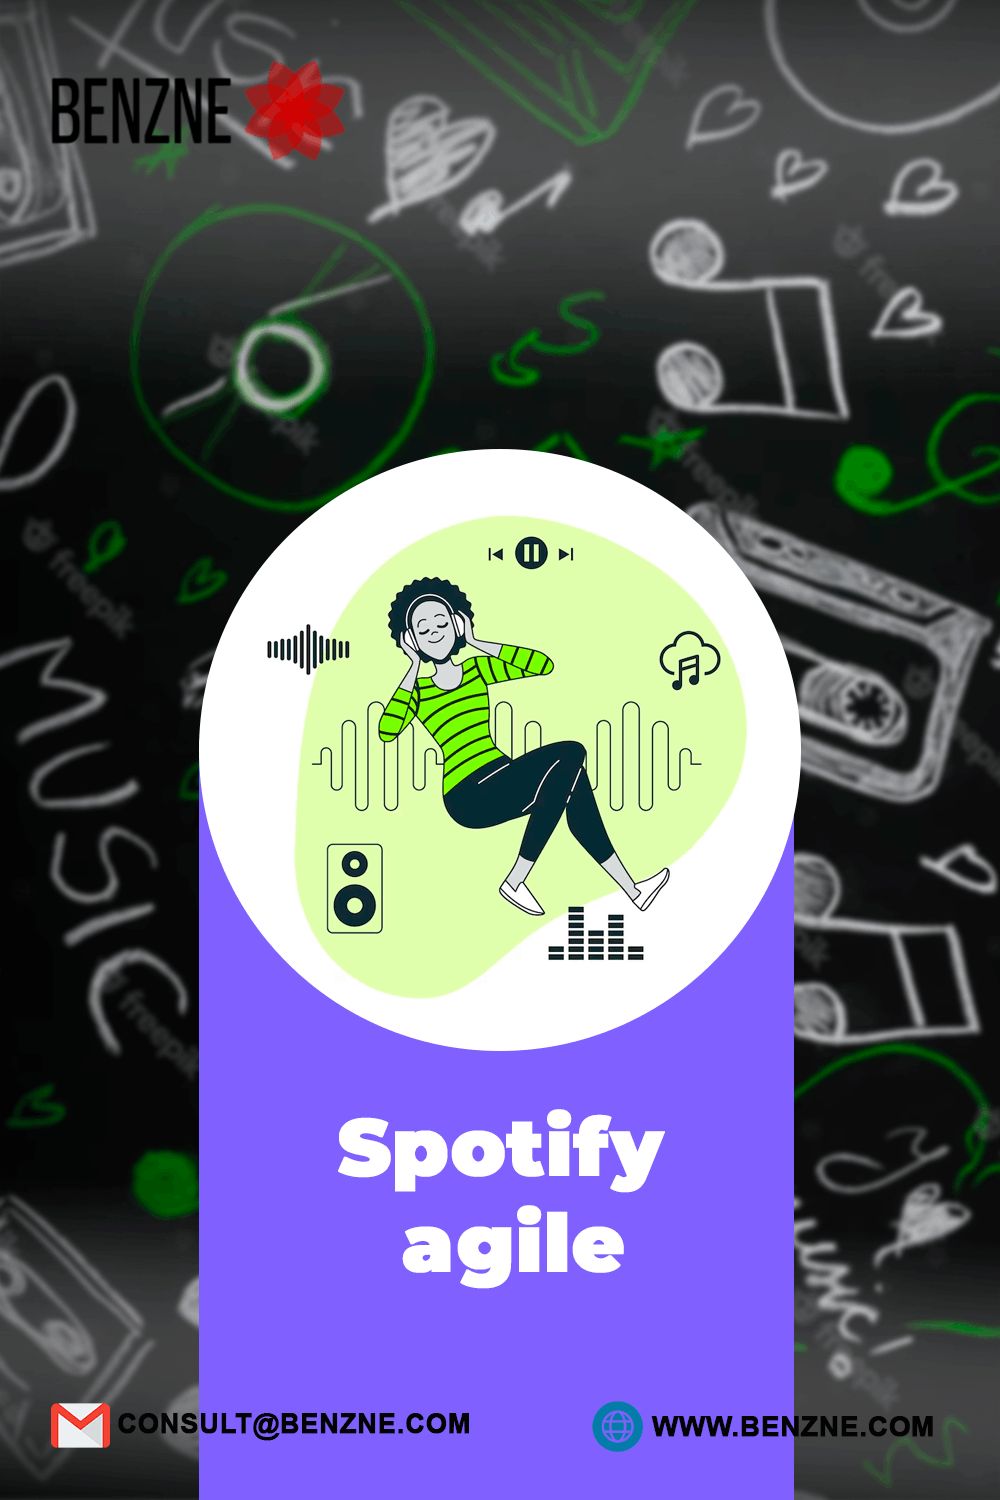 Spotify Agile To Help You With Scaling Agile With Utmost Ease And Proficiency